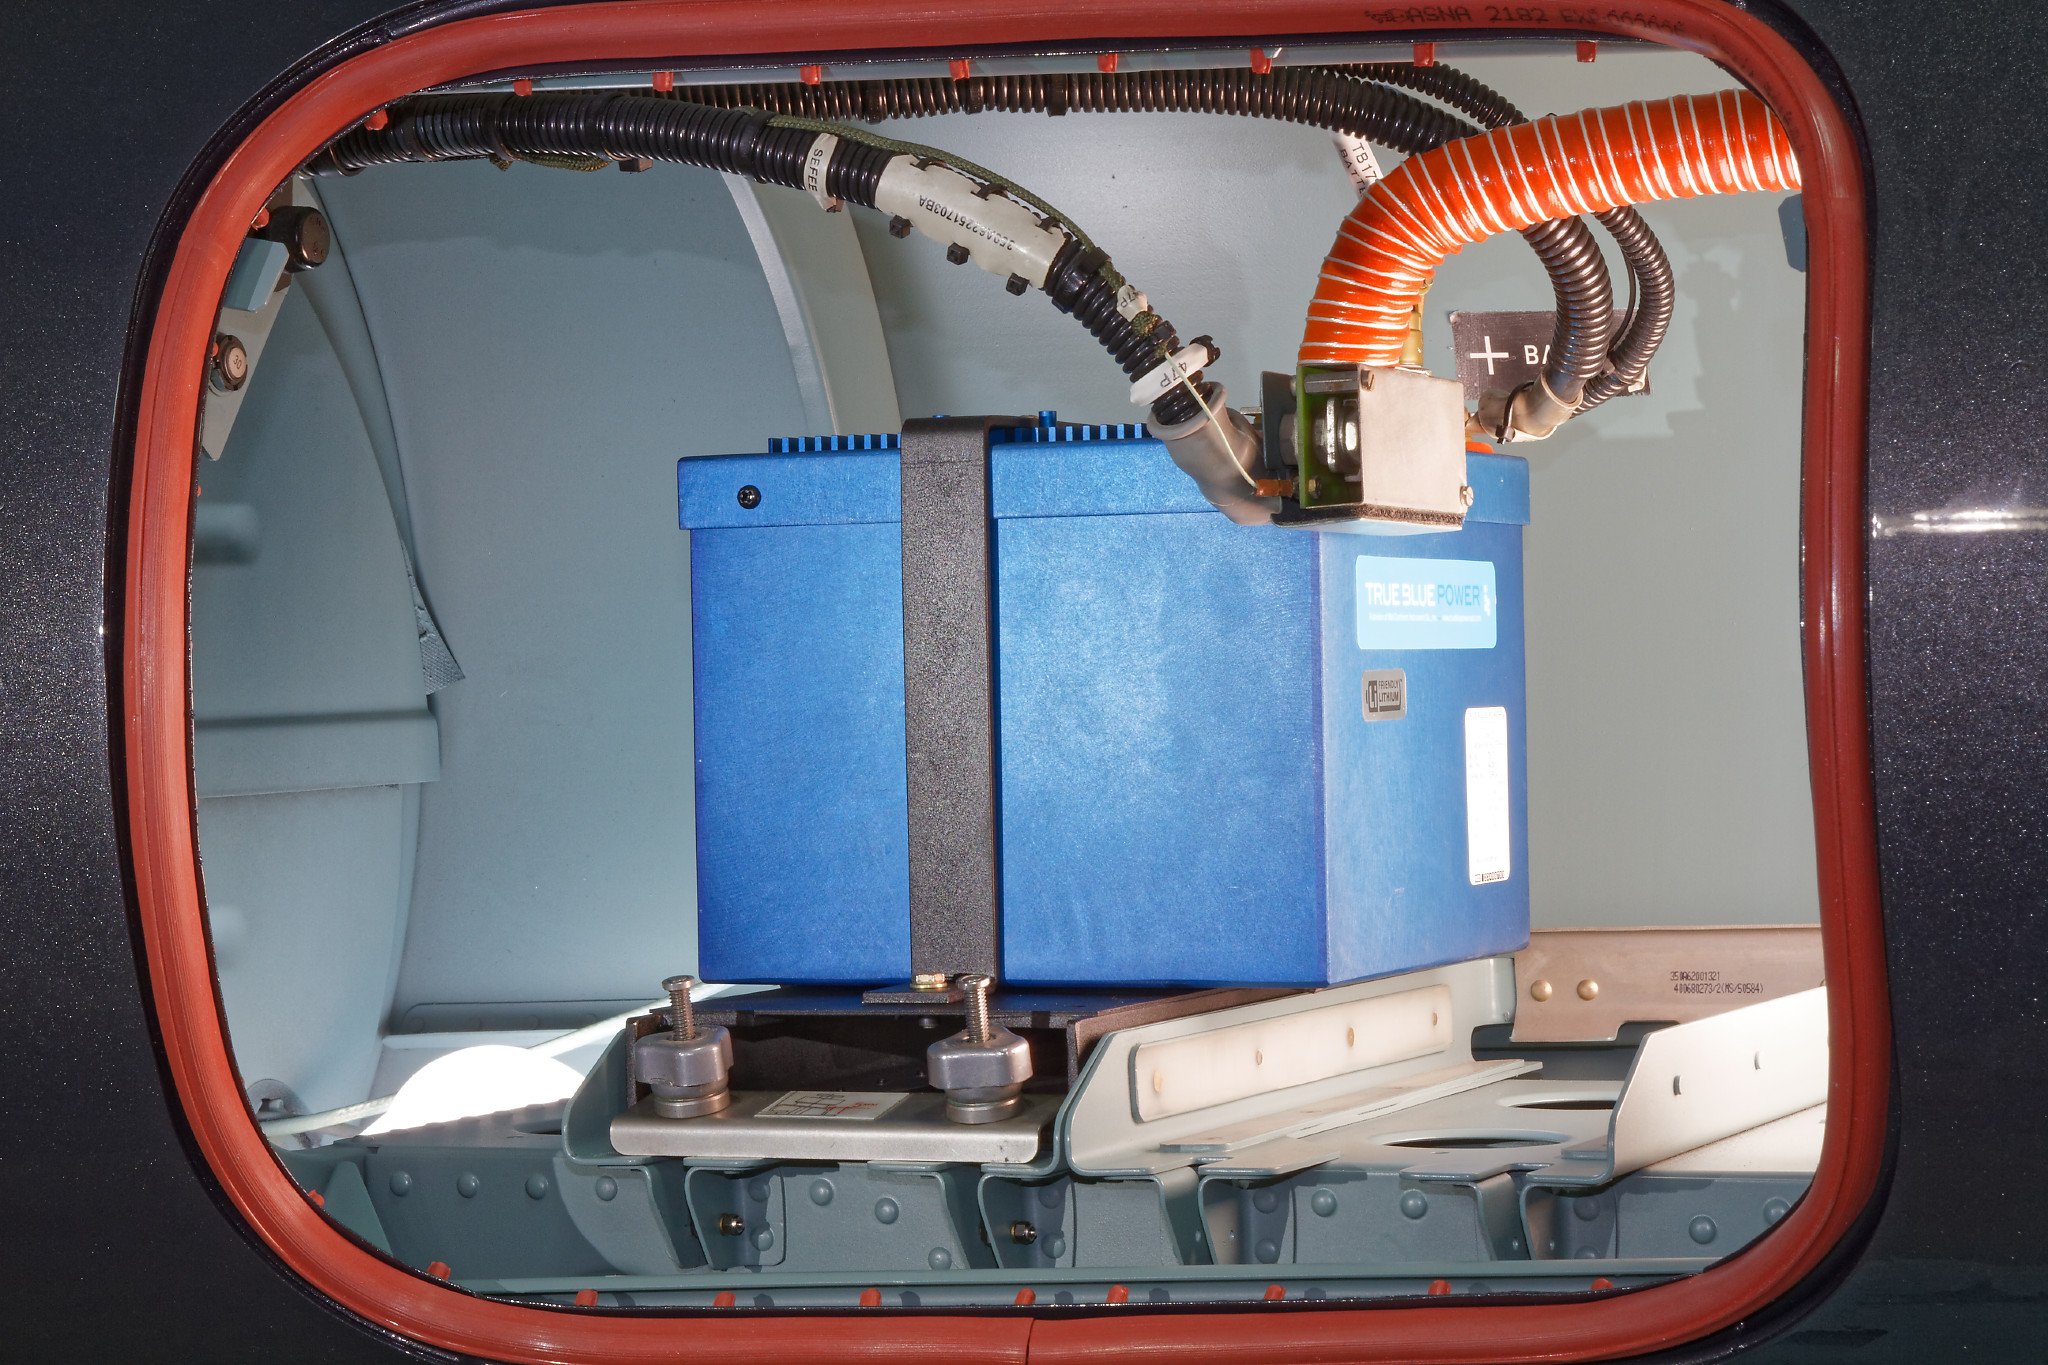 Key features of the Advanced Lithium-Ion Battery include ultra lightweight, less maintenance and overall reduced operating costs over the battery’s lifecycle. EuroTec Photo